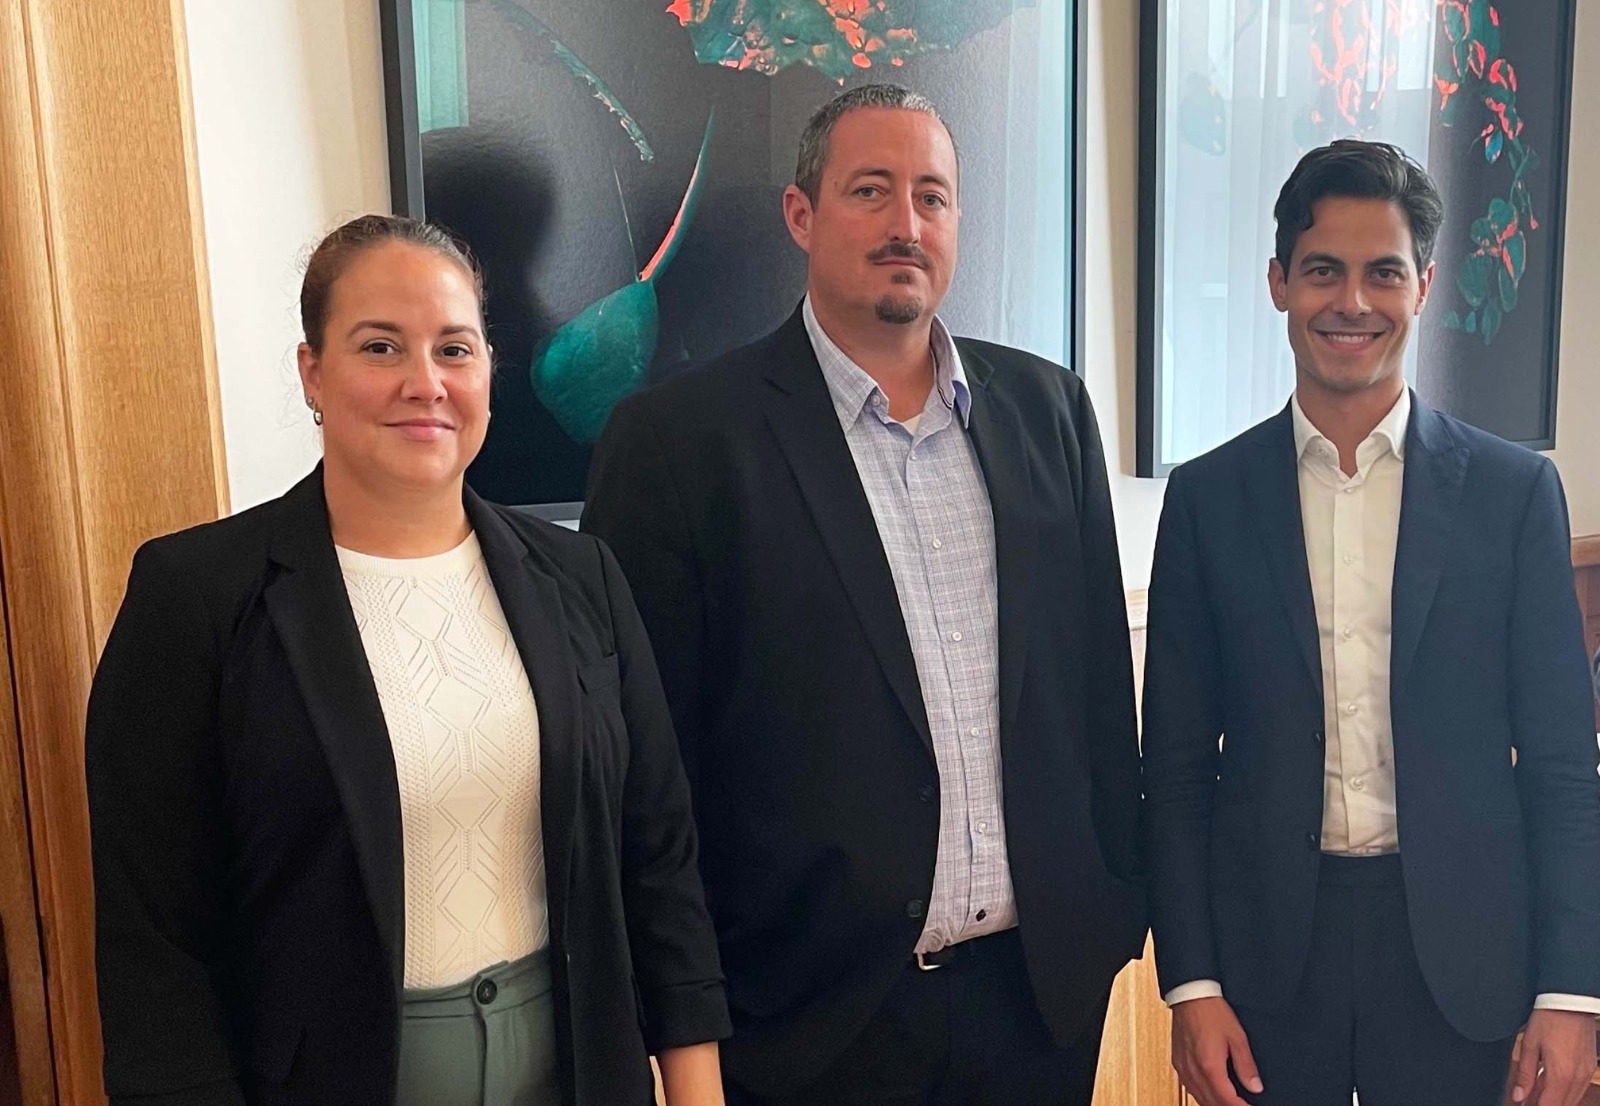 Saba discusses Renewable Energy ambitions with Minister Rob Jetten